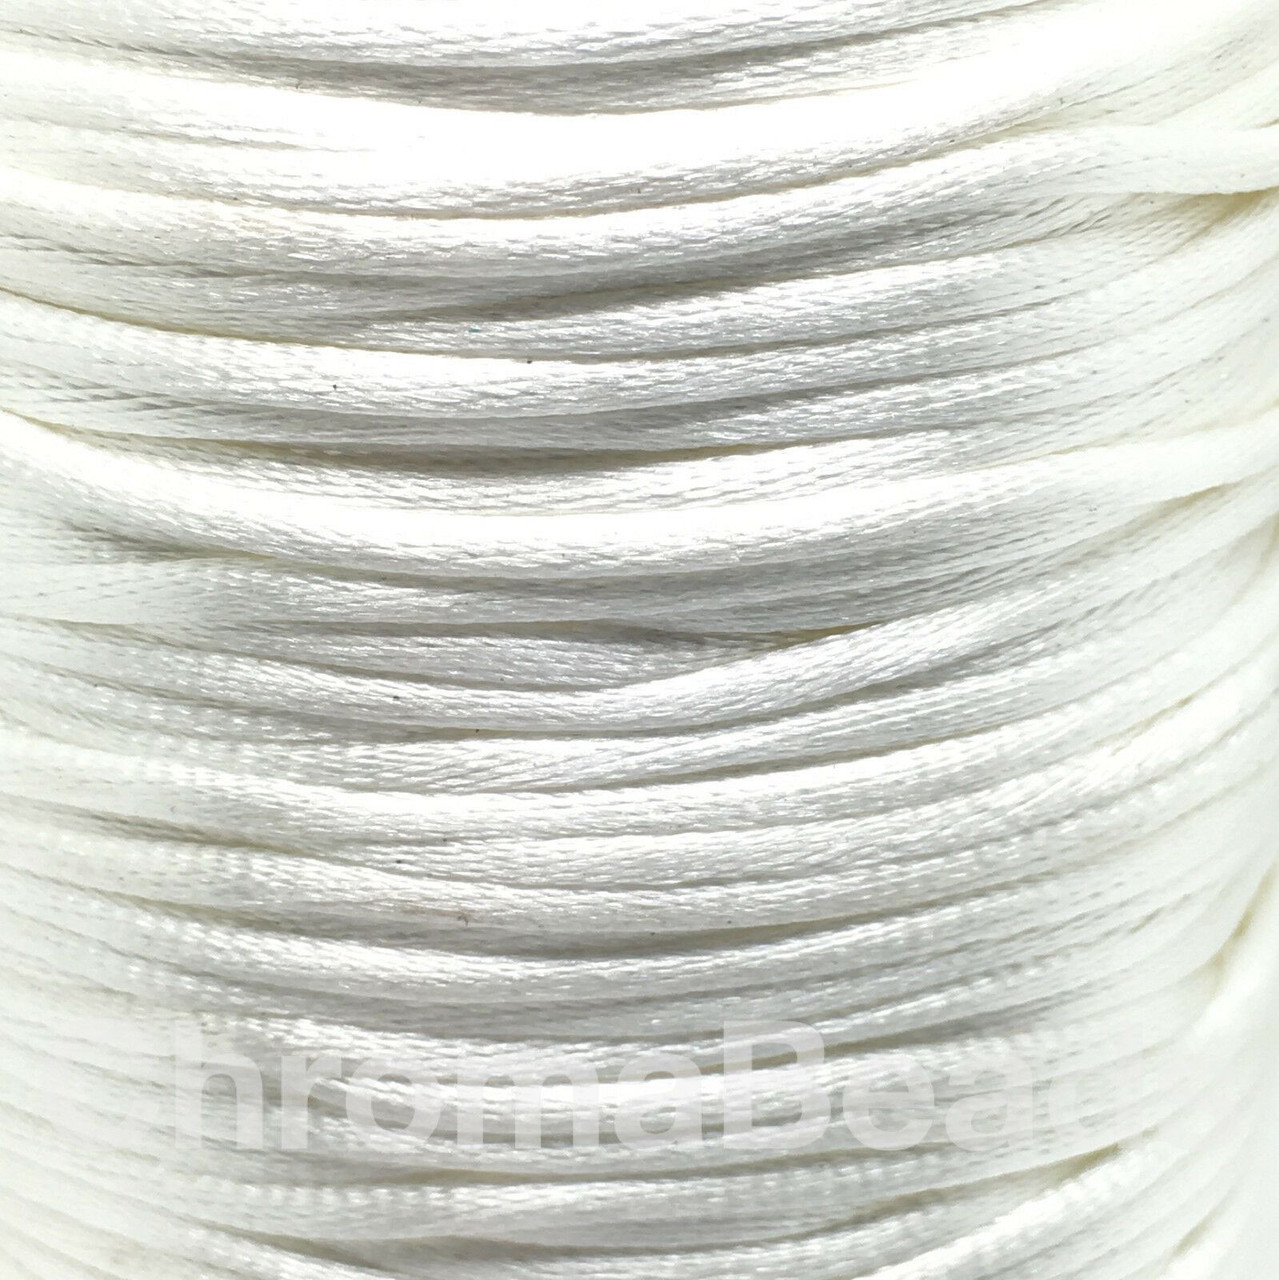 2x Reels of Nylon Cord (Rattail) - White, approx 45m each